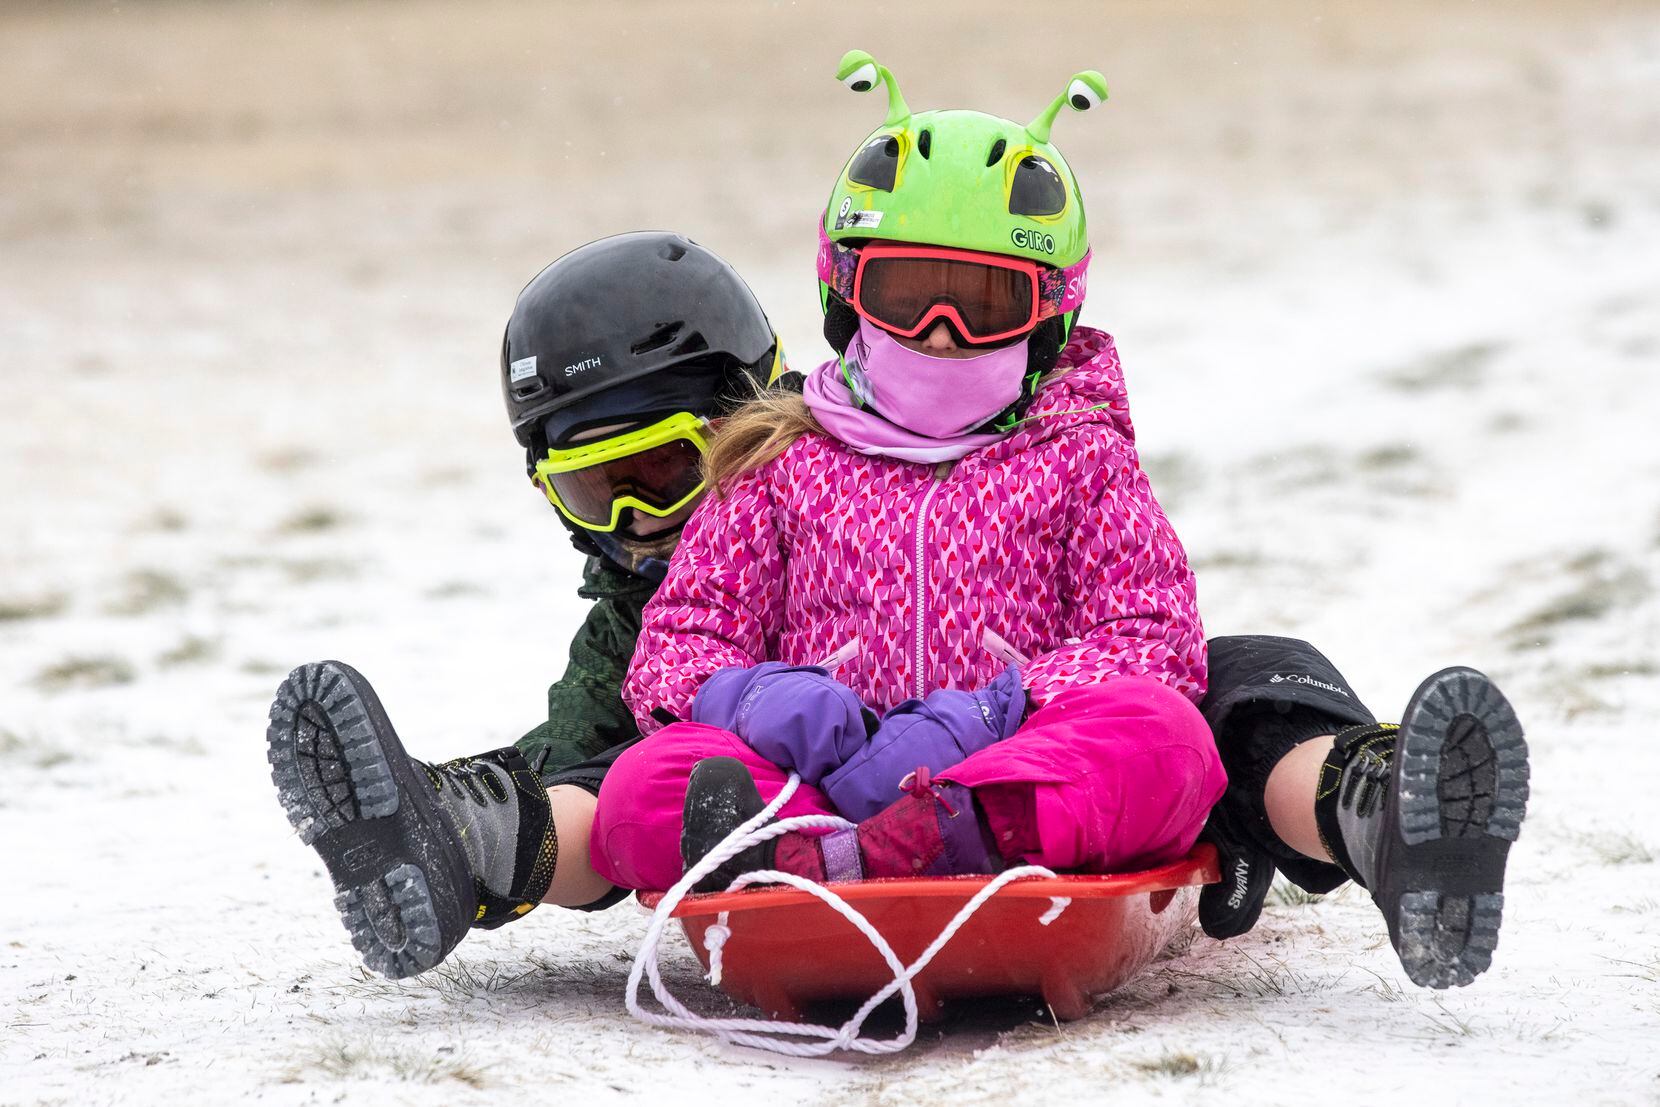 Madeline Daniel, 6, and her brother Riley, 8, played in the snow at Flag Pole Hill Park in Dallas on Feb. 14 as the area braced for even more severe weather to roll in. Their father, Matt Daniel, said he had both the sled years before when the family moved into their house, which sits on a hill. “I bought it in the middle of summer that year,” he said, laughing. “I’m glad they’re finally getting to enjoy it.”